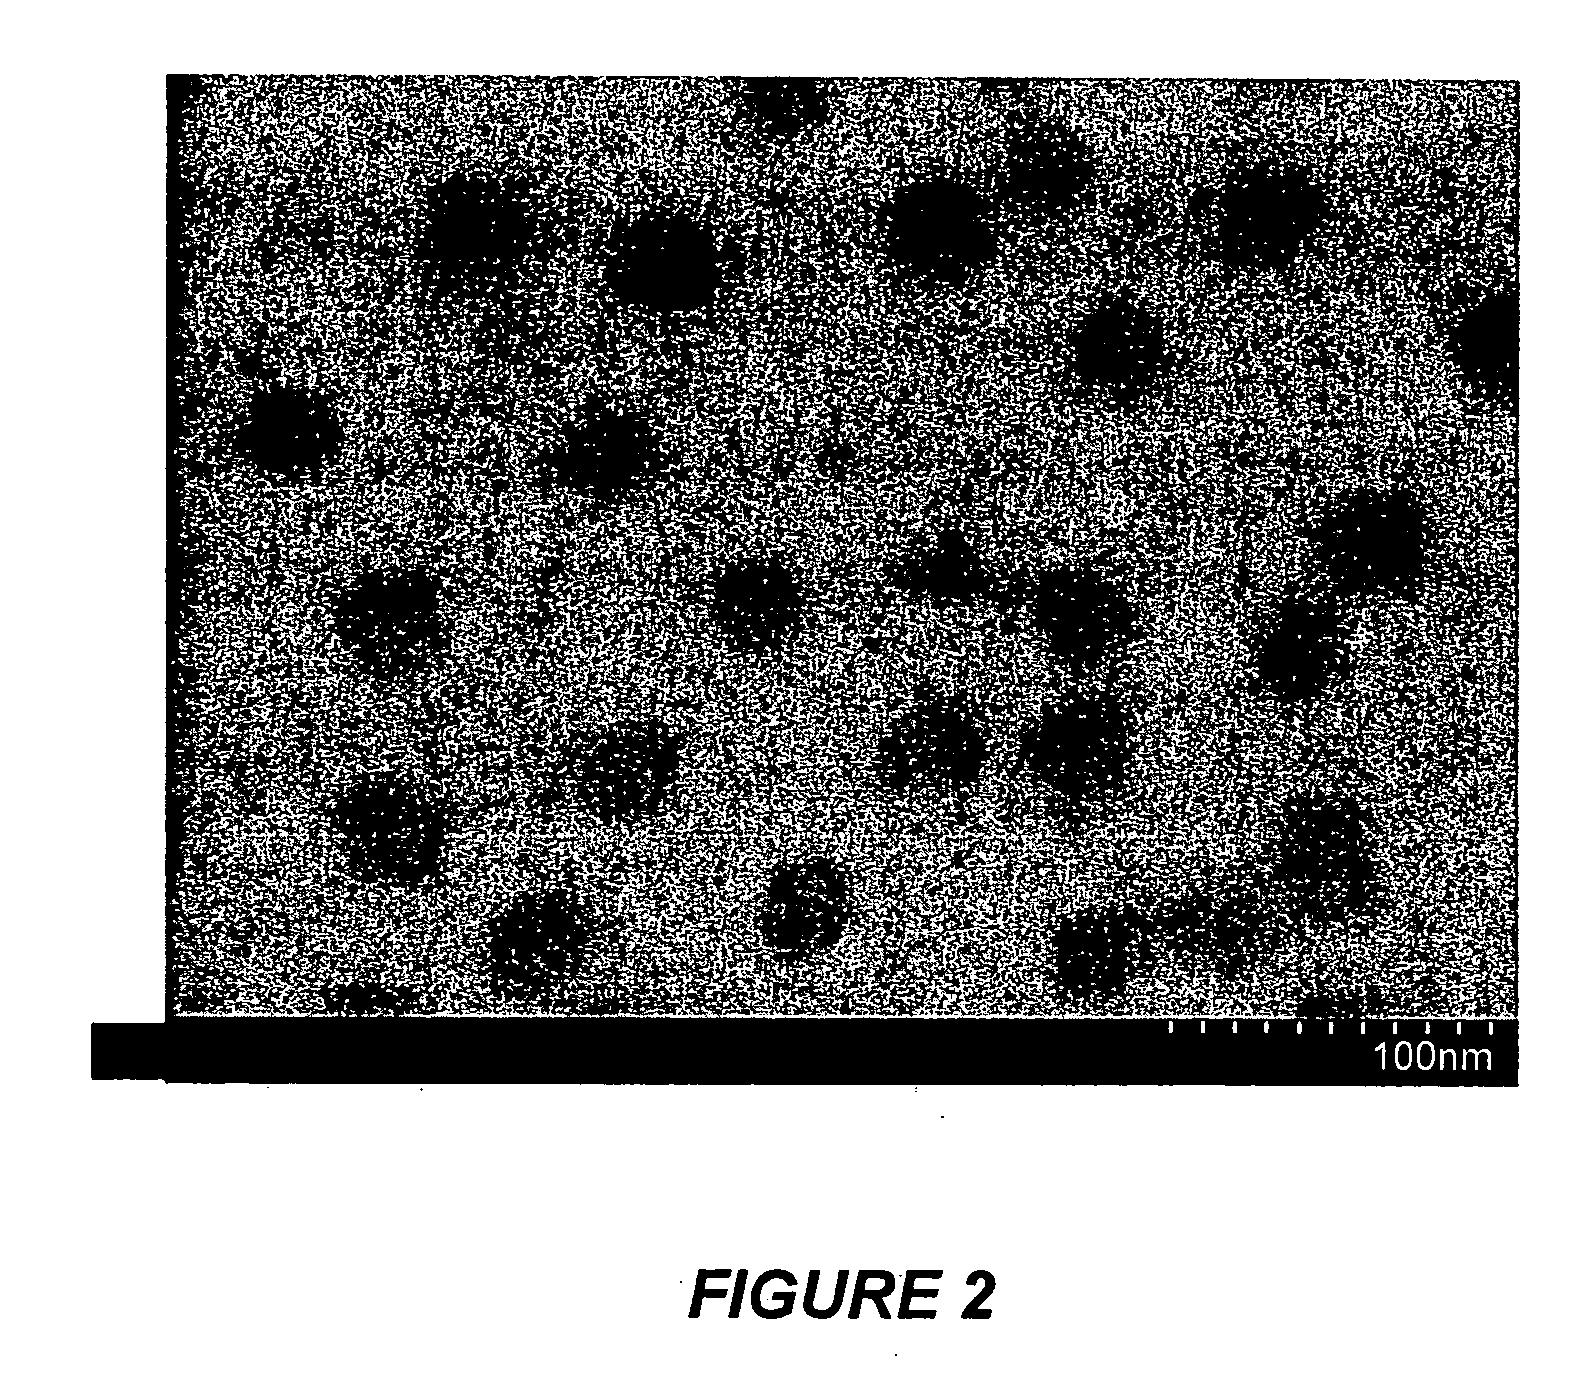 Hollow nano-particles and method thereof